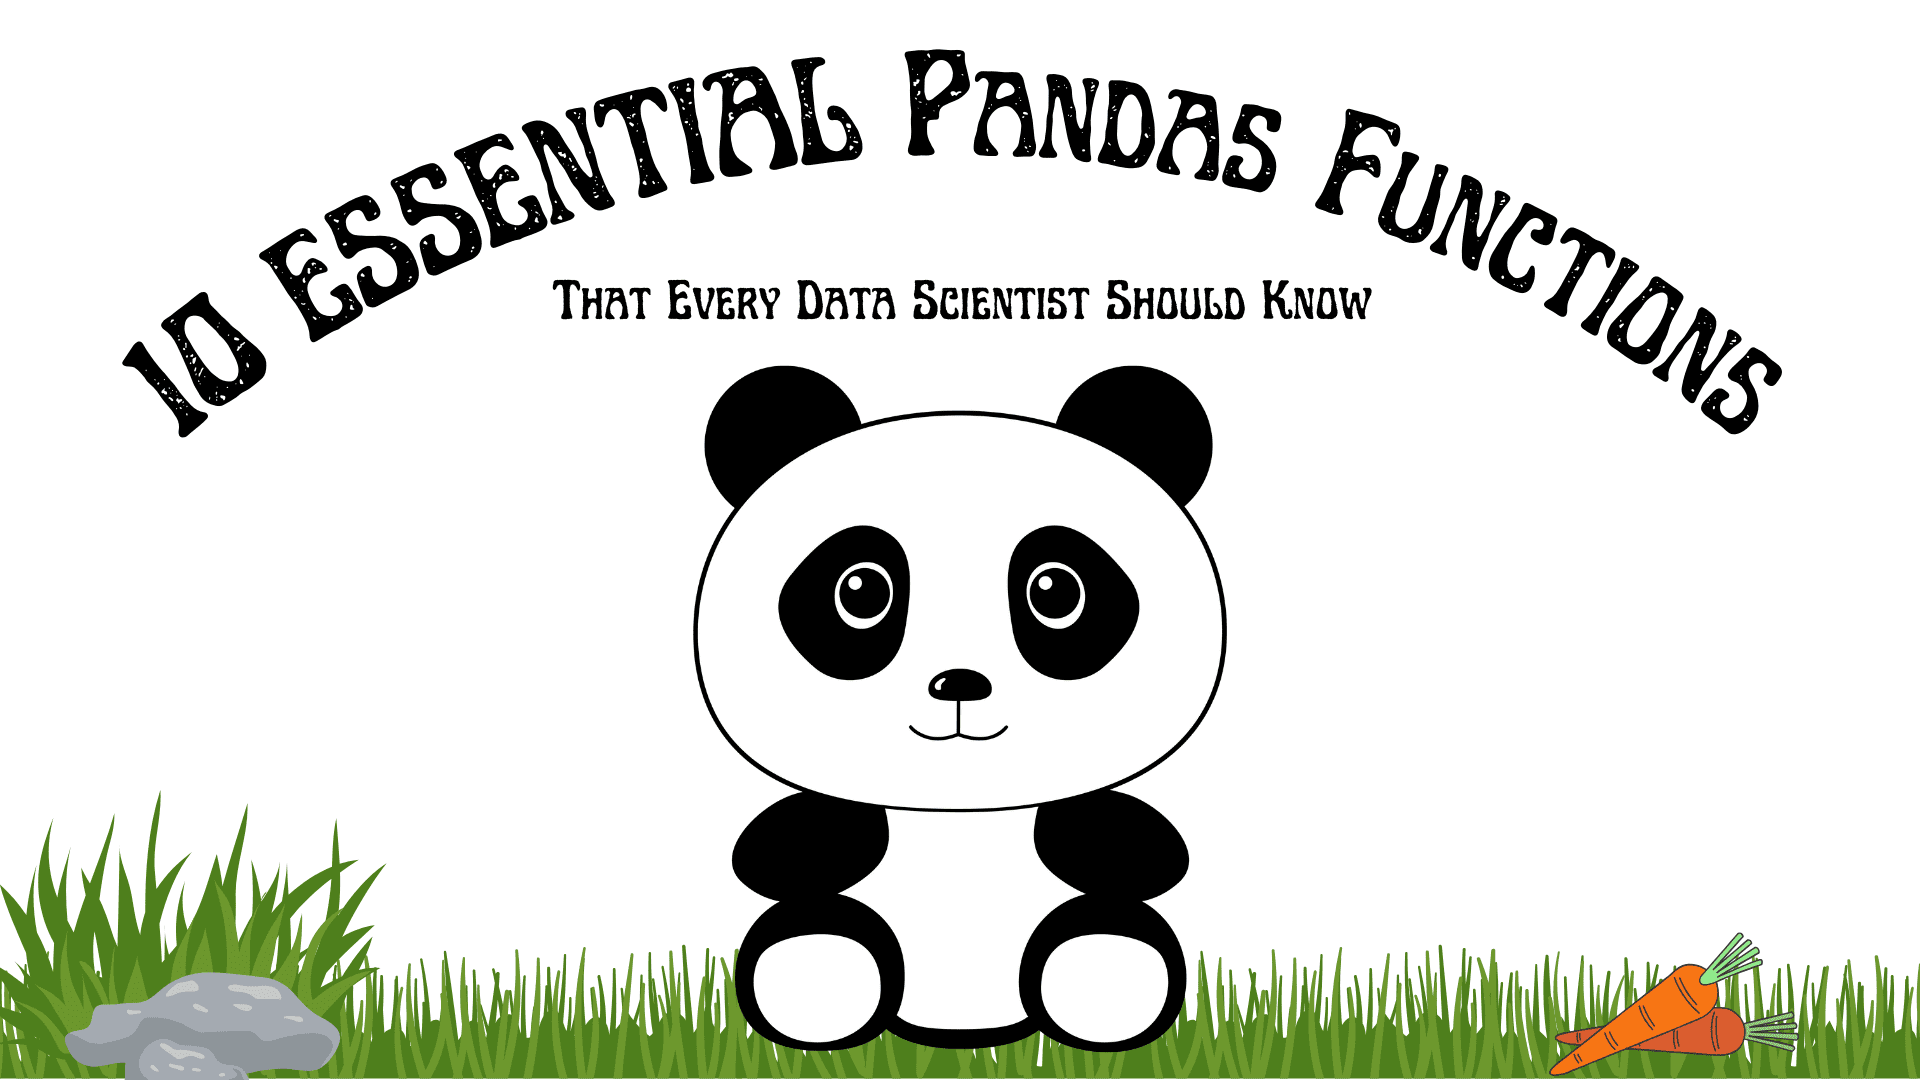 10 Essential Pandas Features Every Data Scientist Should Know